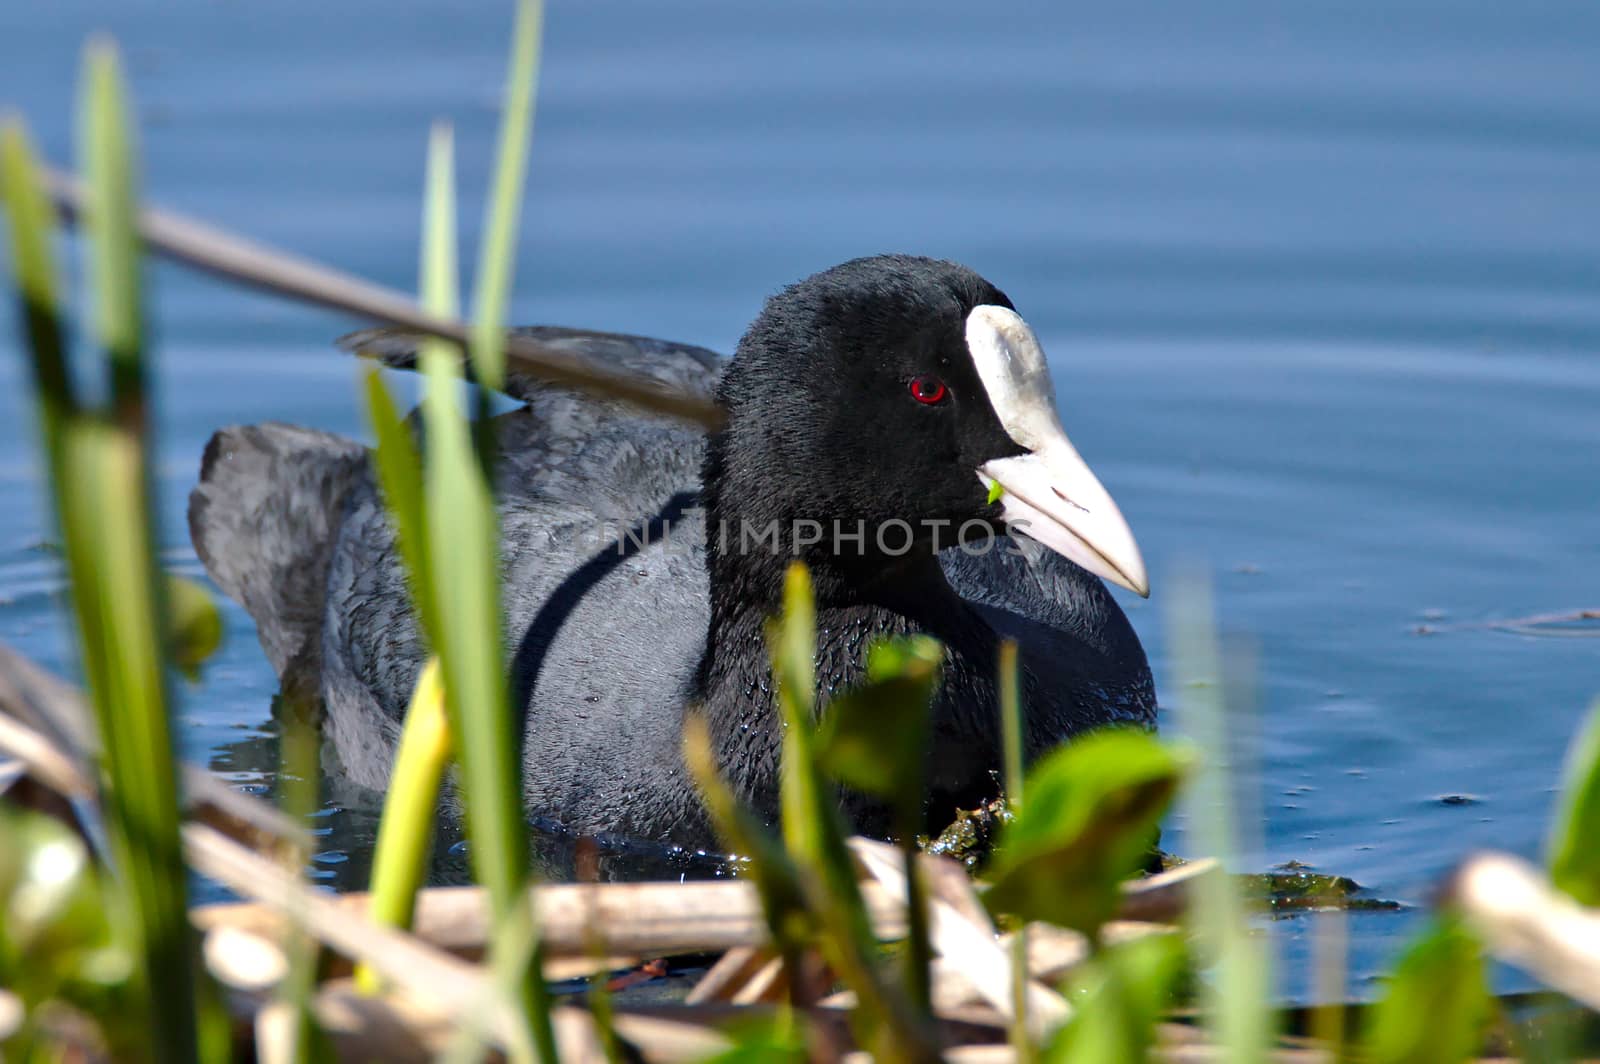 Colorful close photo of an eurasian coot swimming in blue clear water. Just finished eating of fresh green leaves. Green plants on blurred foreground.